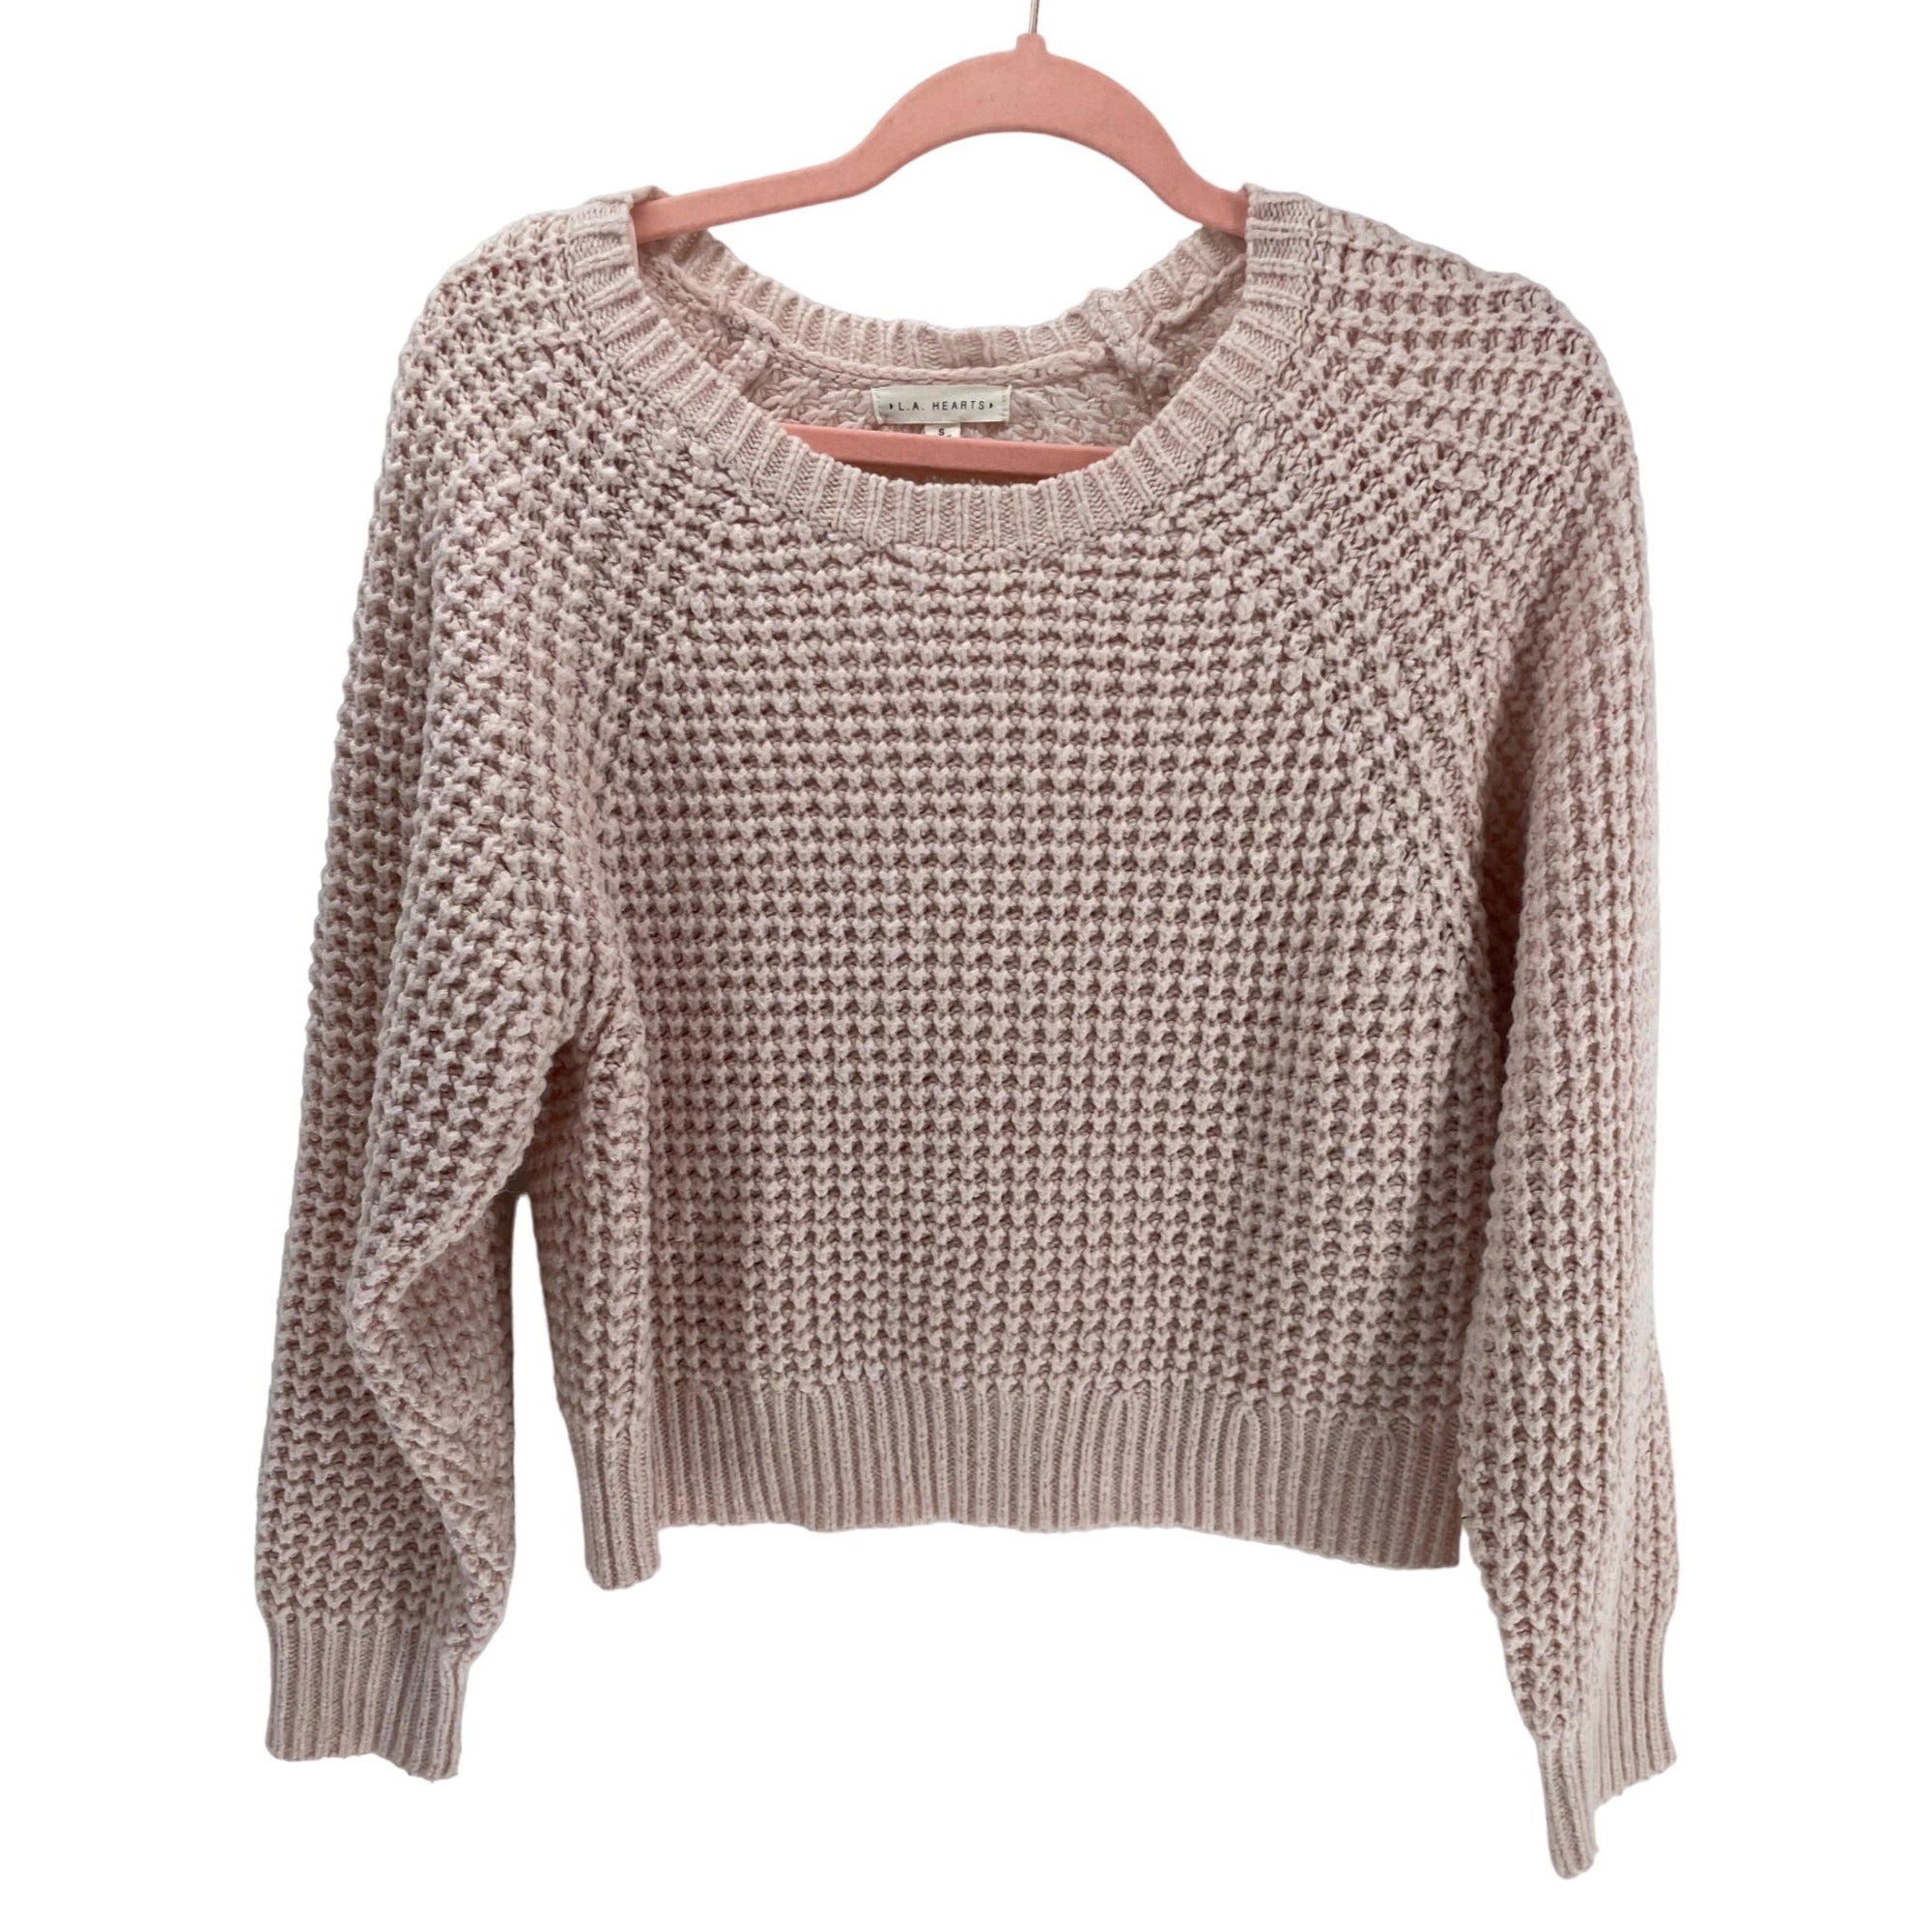 L.A. Hearts Women’s Small Light Pink Crew Neck Sweater